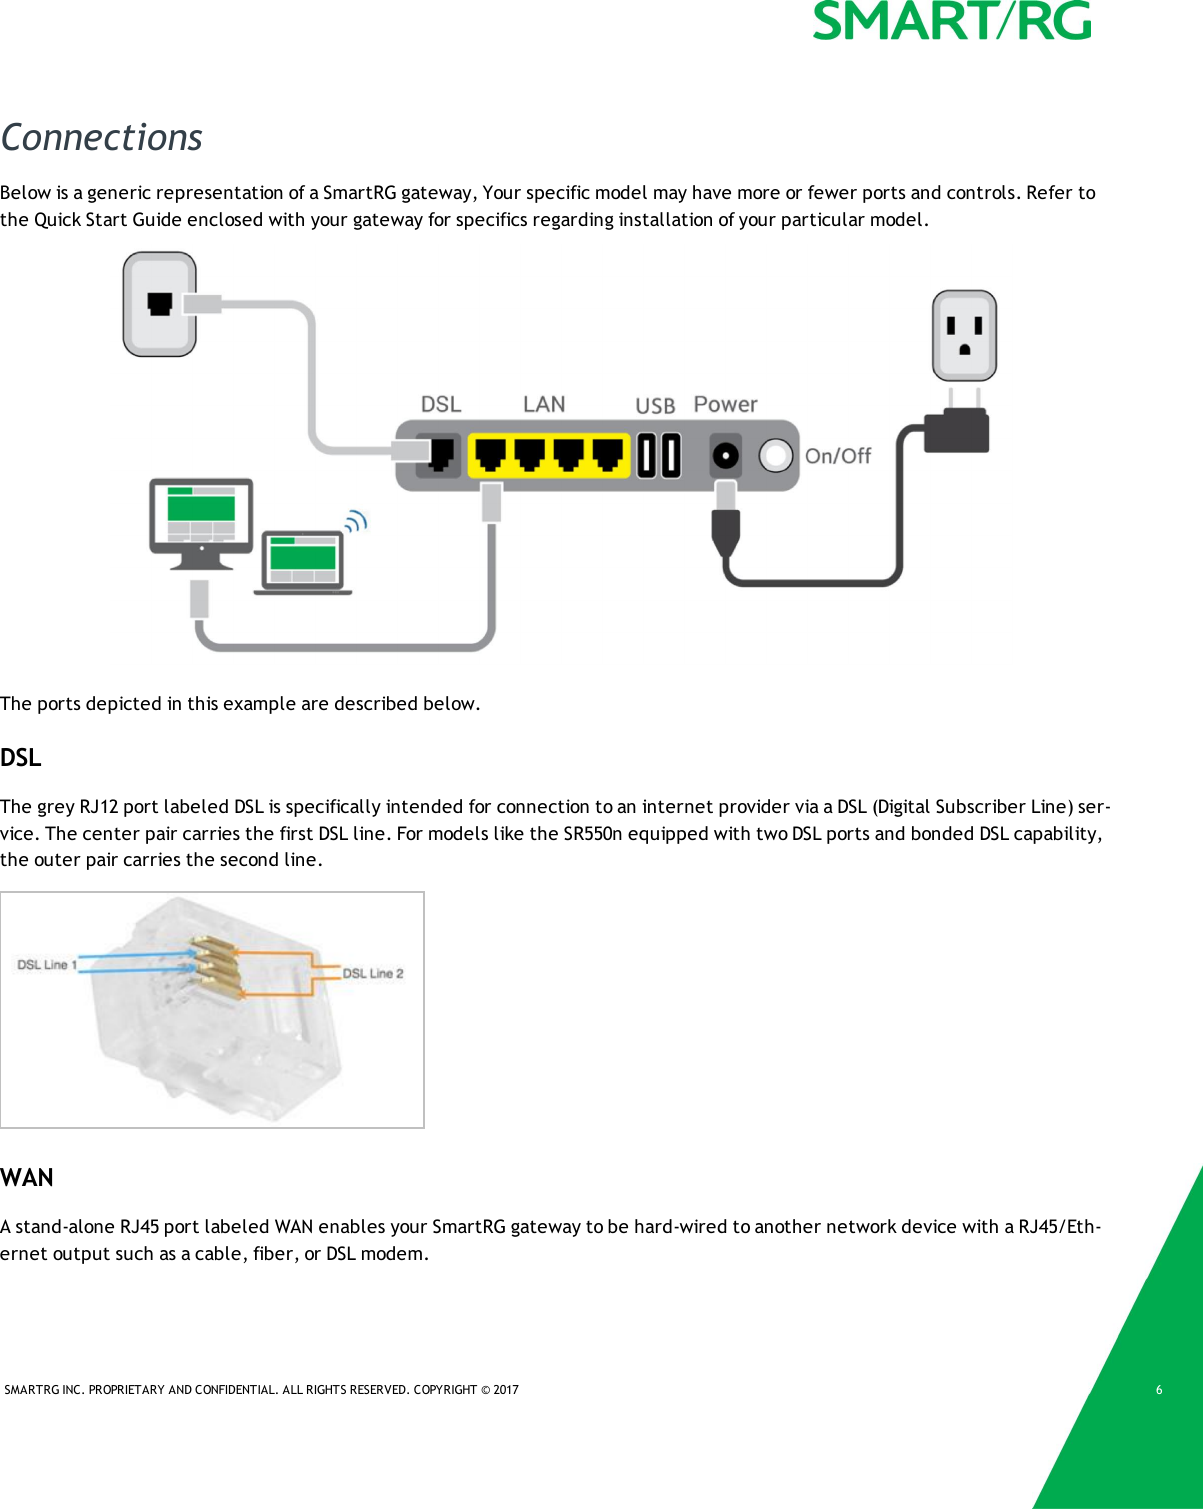 SMARTRG INC. PROPRIETARY AND CONFIDENTIAL. ALL RIGHTS RESERVED. COPYRIGHT © 2017 6ConnectionsBelow is a generic representation of a SmartRG gateway, Your specific model may have more or fewer ports and controls. Refer tothe Quick Start Guide enclosed with your gateway for specifics regarding installation of your particular model.The ports depicted in this example are described below.DSLThe grey RJ12 port labeled DSL is specifically intended for connection to an internet provider via a DSL (Digital Subscriber Line) ser-vice. The center pair carries the first DSL line. For models like the SR550n equipped with two DSL ports and bonded DSL capability,the outer pair carries the second line.WANA stand-alone RJ45 port labeled WAN enables your SmartRG gateway to be hard-wired to another network device with a RJ45/Eth-ernet output such as a cable, fiber, or DSL modem.